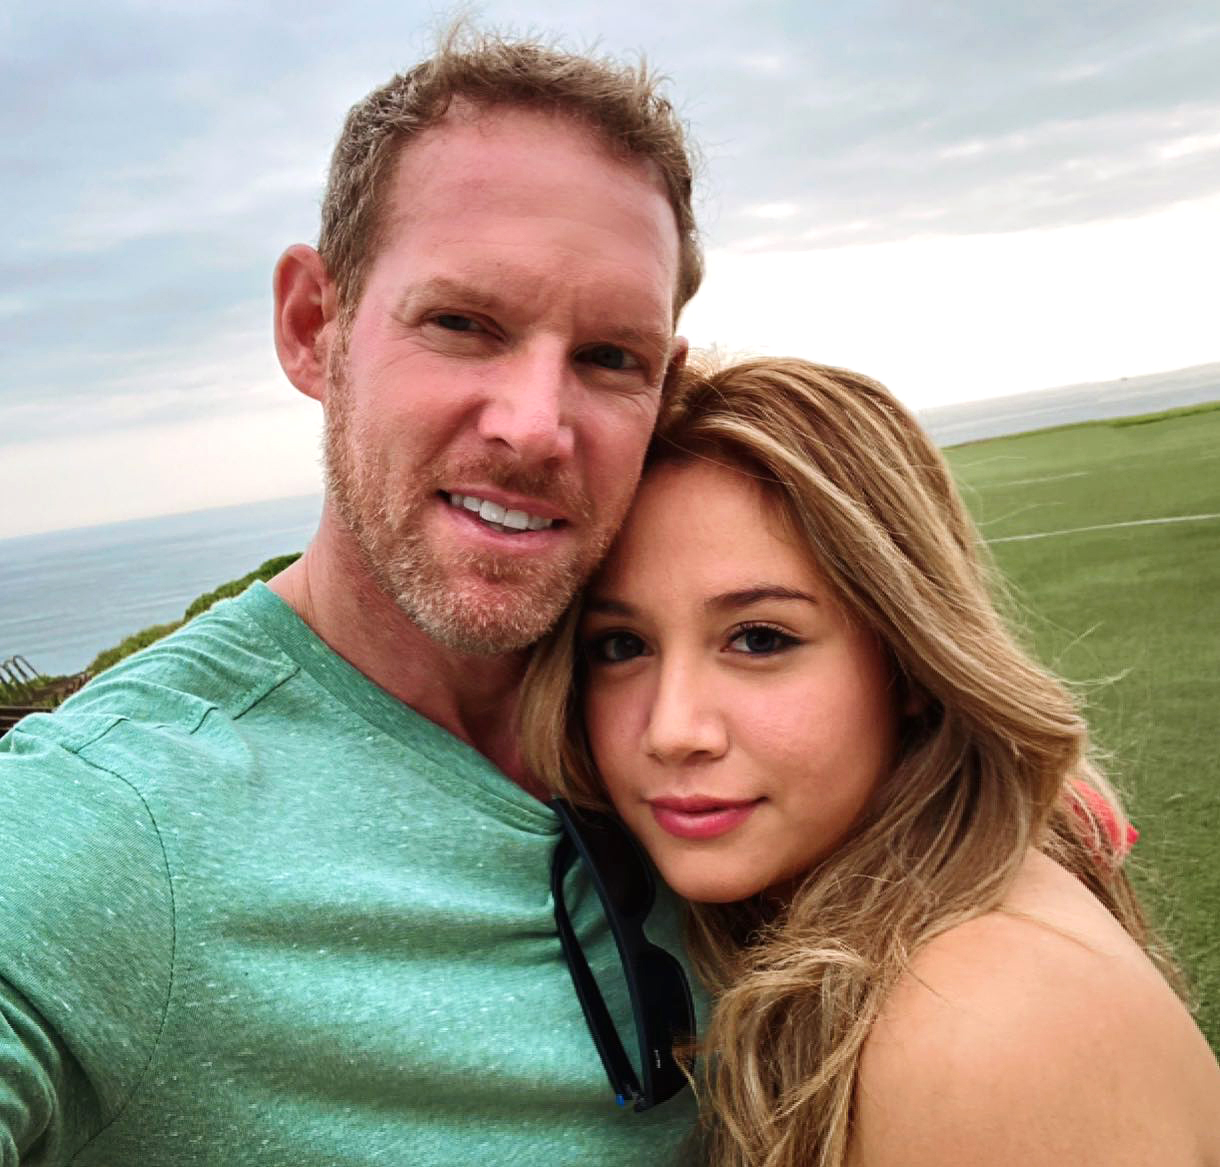 '90 Day Fiance' Are Ben and Mahogany Still Together? In Touch Weekly